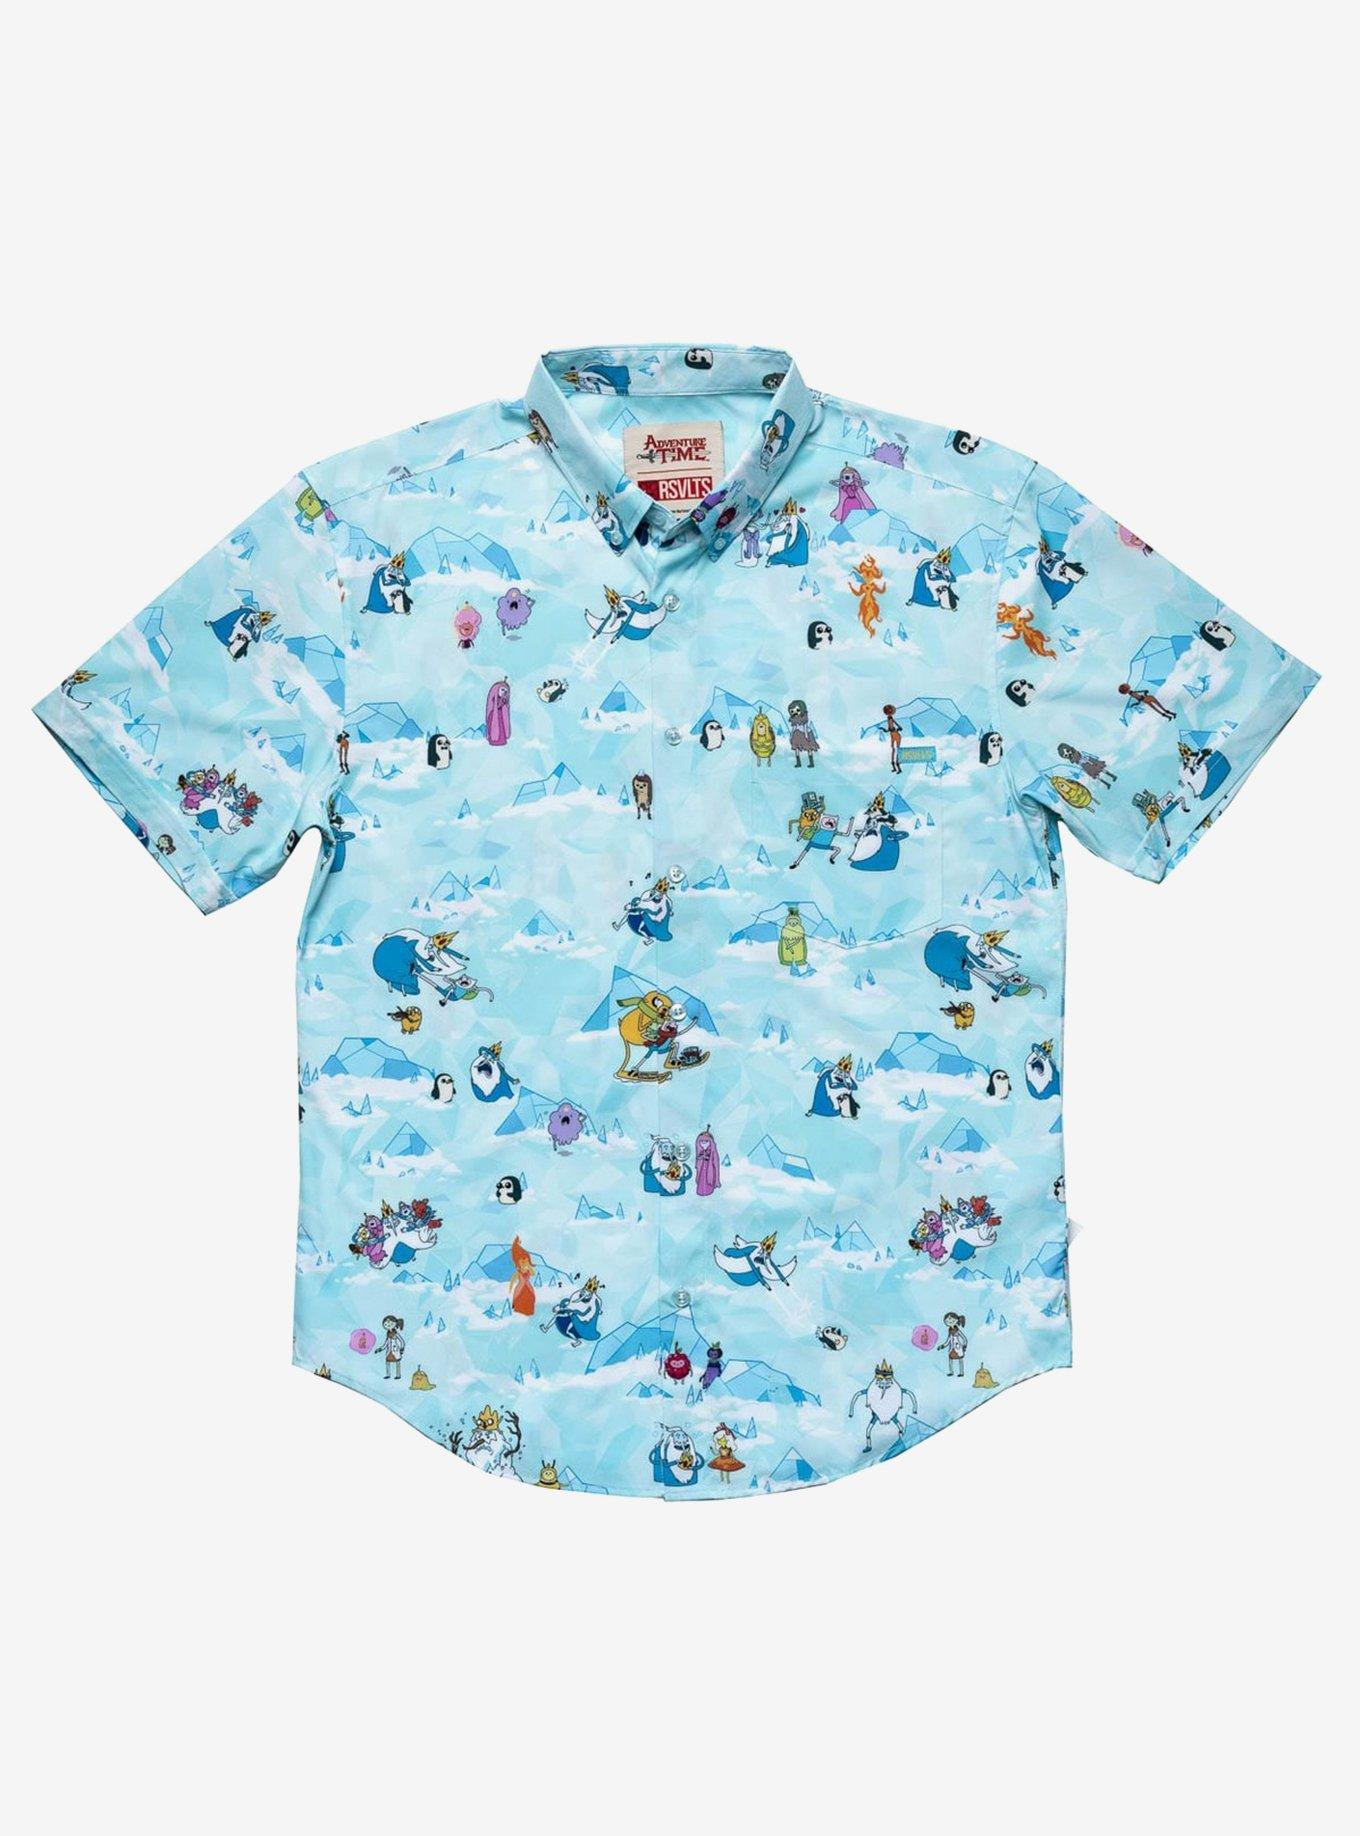 RSVLTS Adventure Time "All Hail the Ice King" Button-Up Shirt, BLUE, hi-res